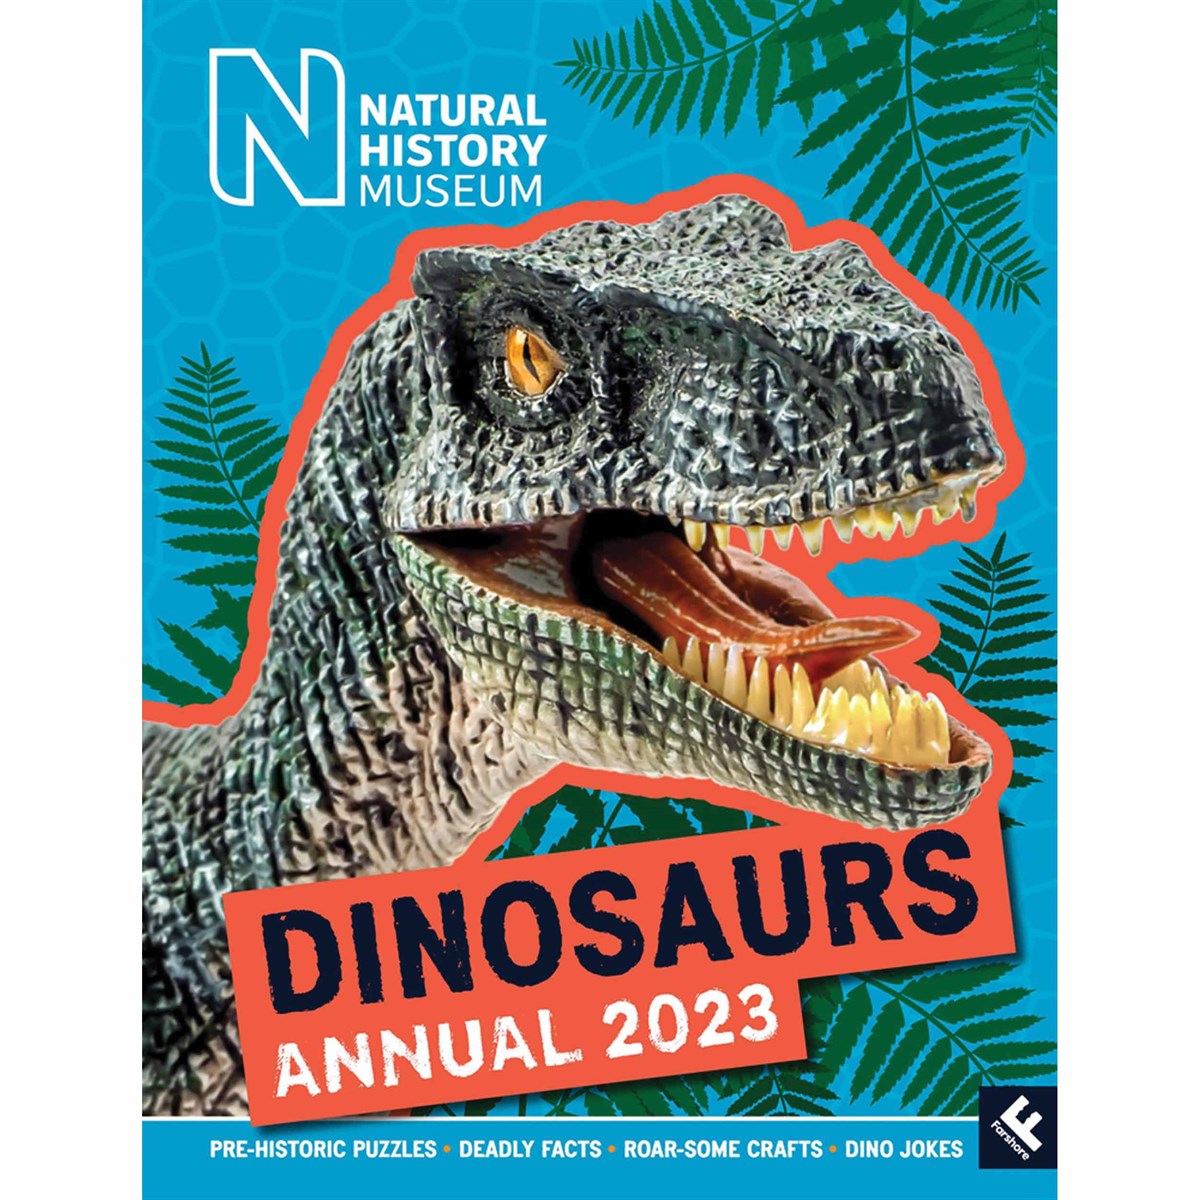 Natural History Museum, Dinosaurs 2023 Annuals